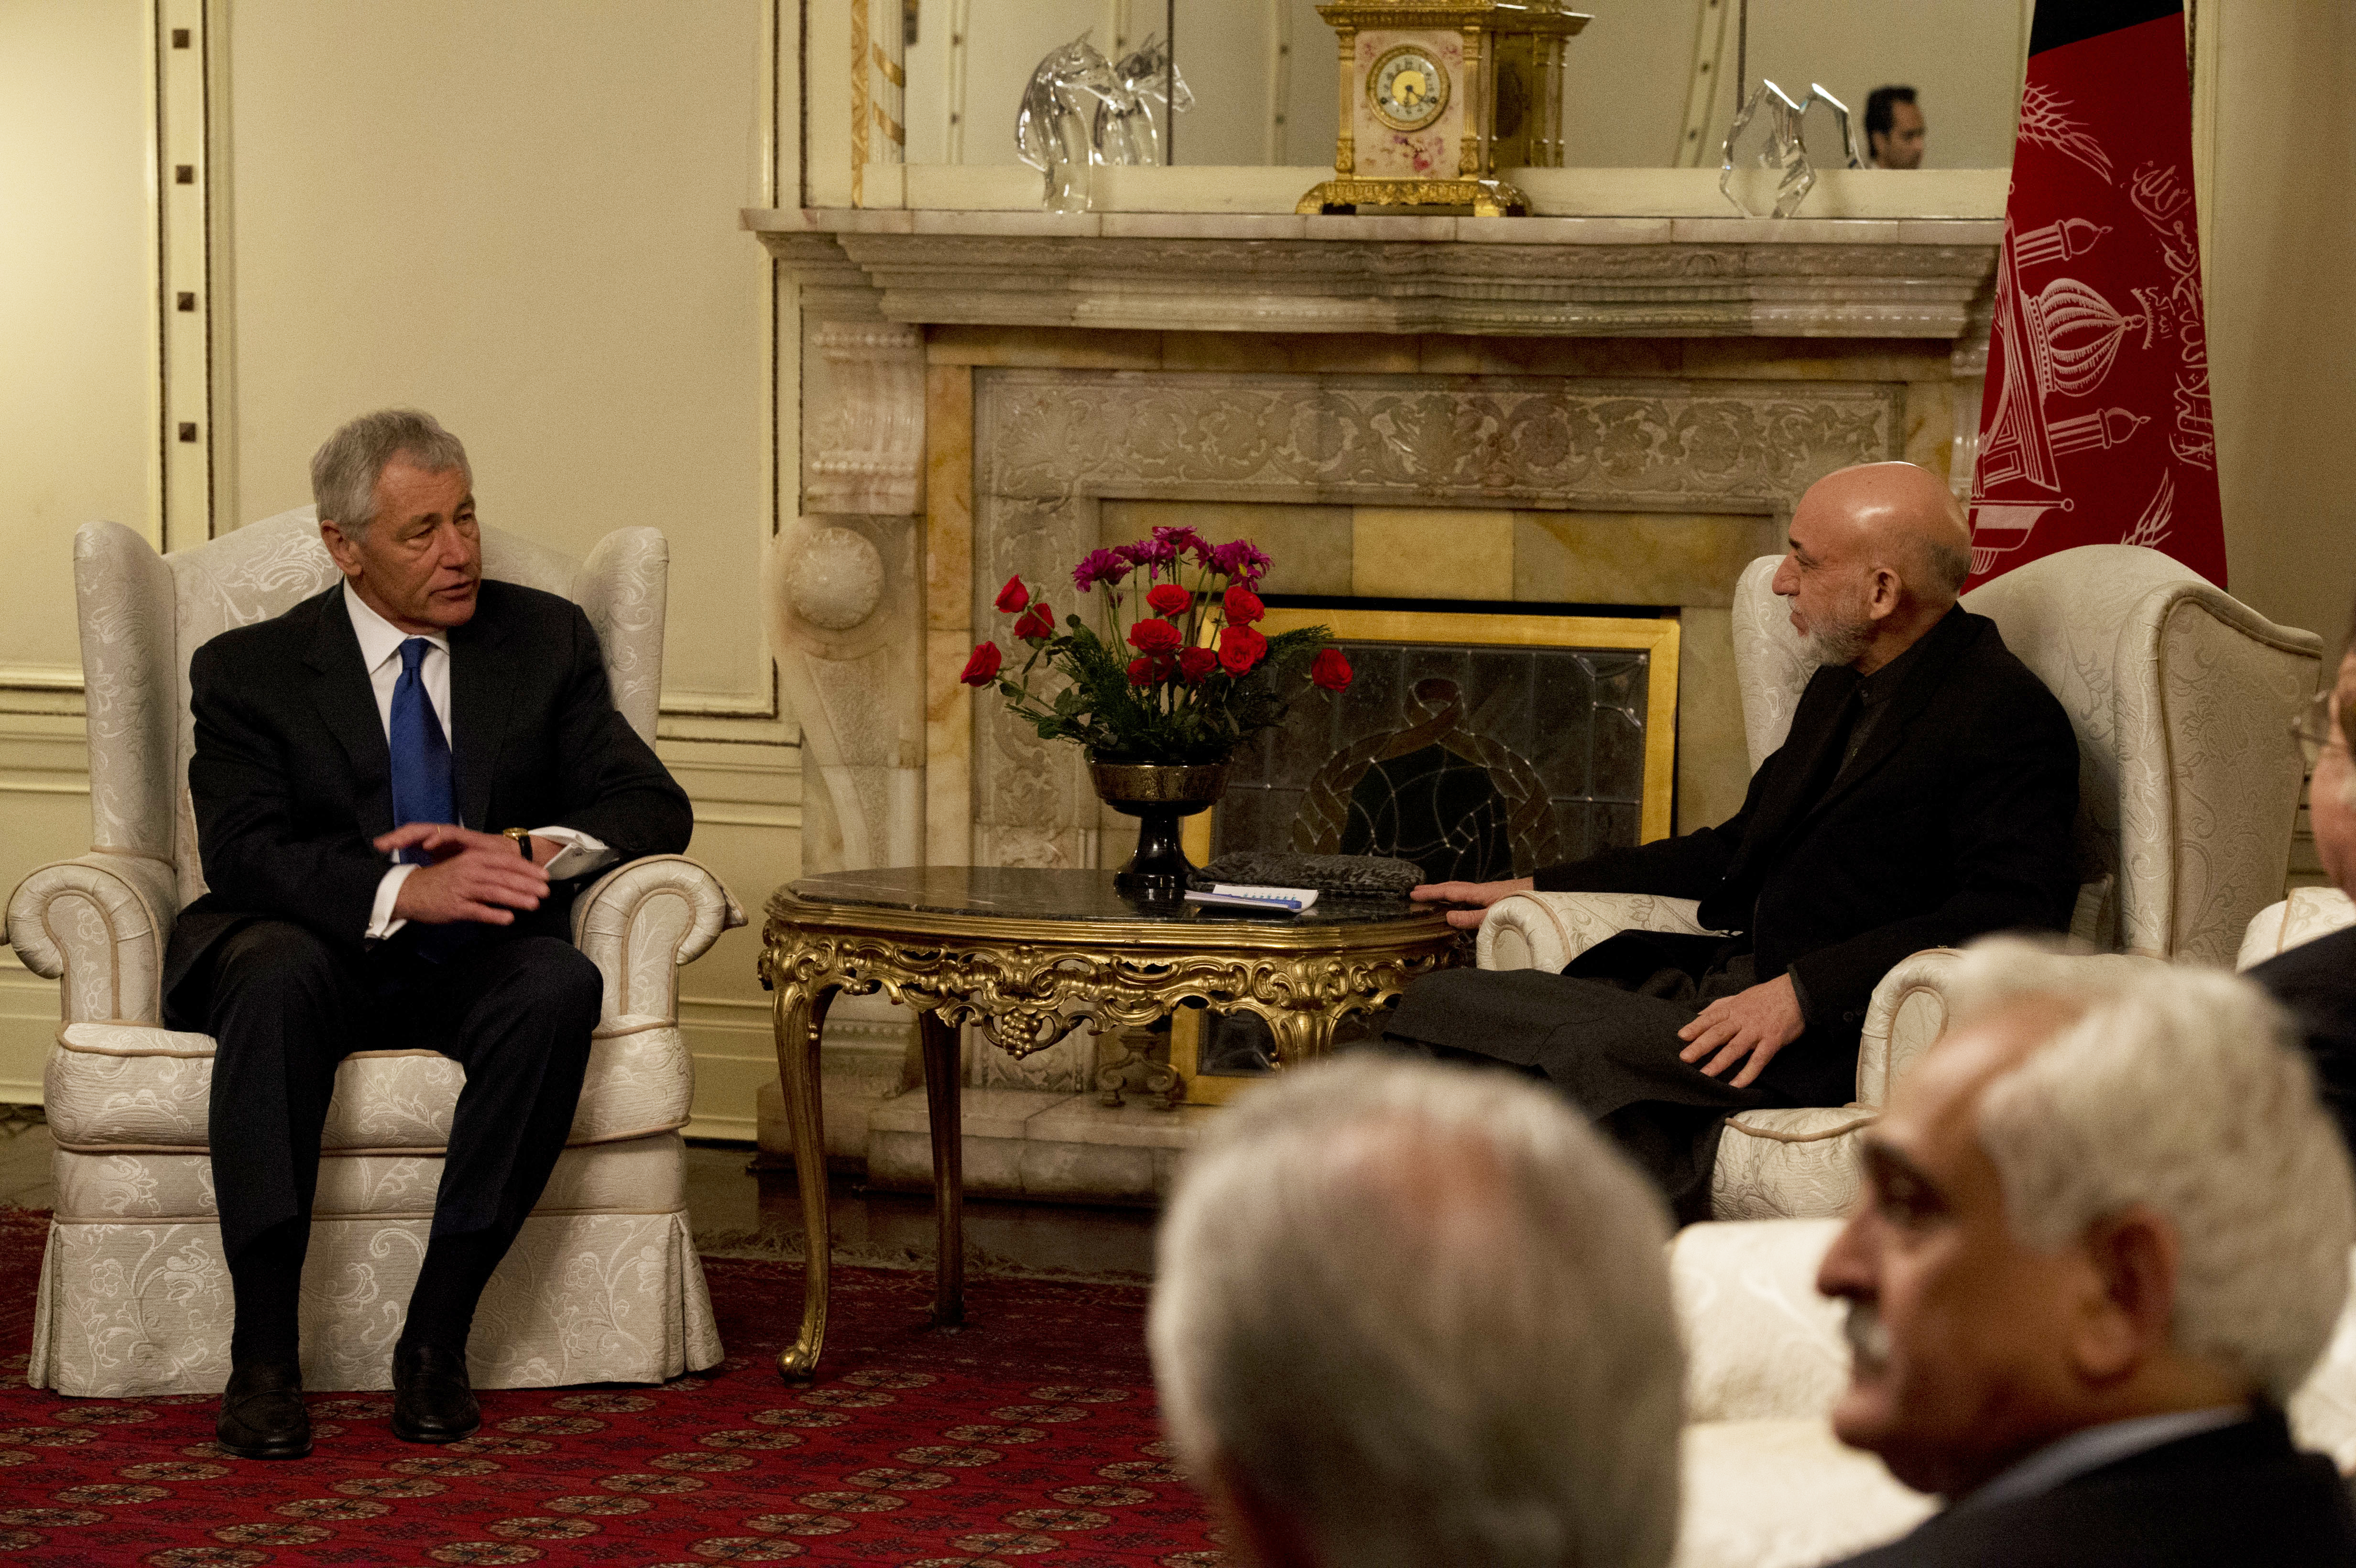 Secretary of Defense Chuck Hagel, left, meets with President of Afghanistan Hamid Karzai, right, in Kabul, Afghanistan, on March 10, 2013 130310-D-BW835-717